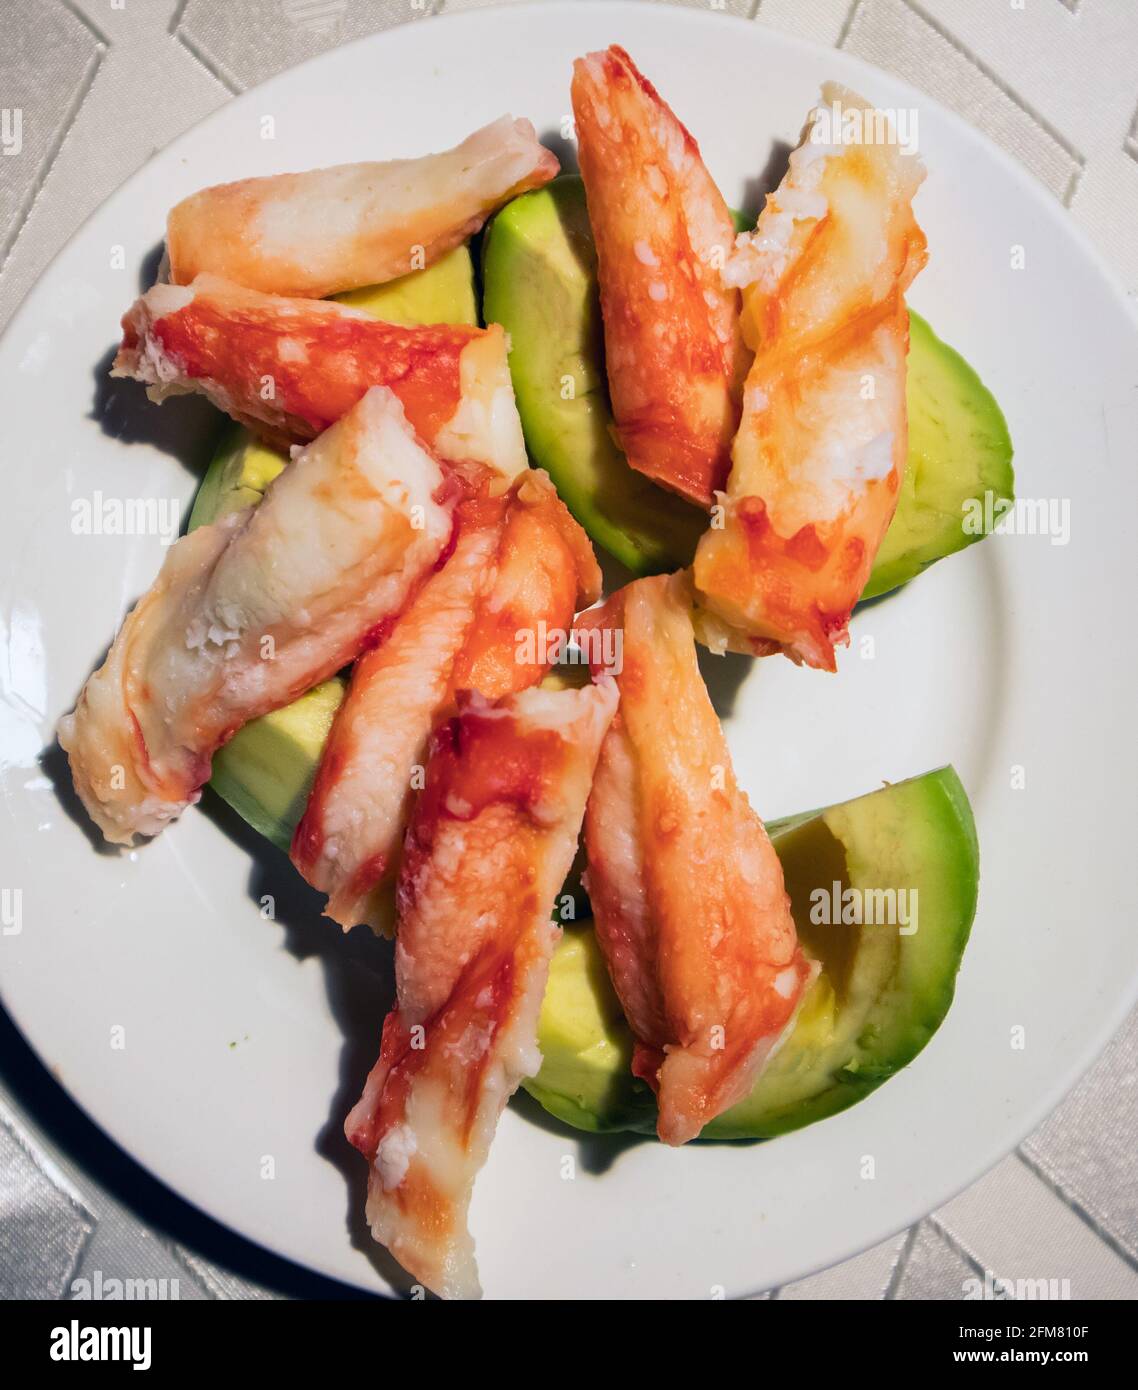 Peeled and cooked crab legs lying on a white plate with sliced ripe avocado Stock Photo